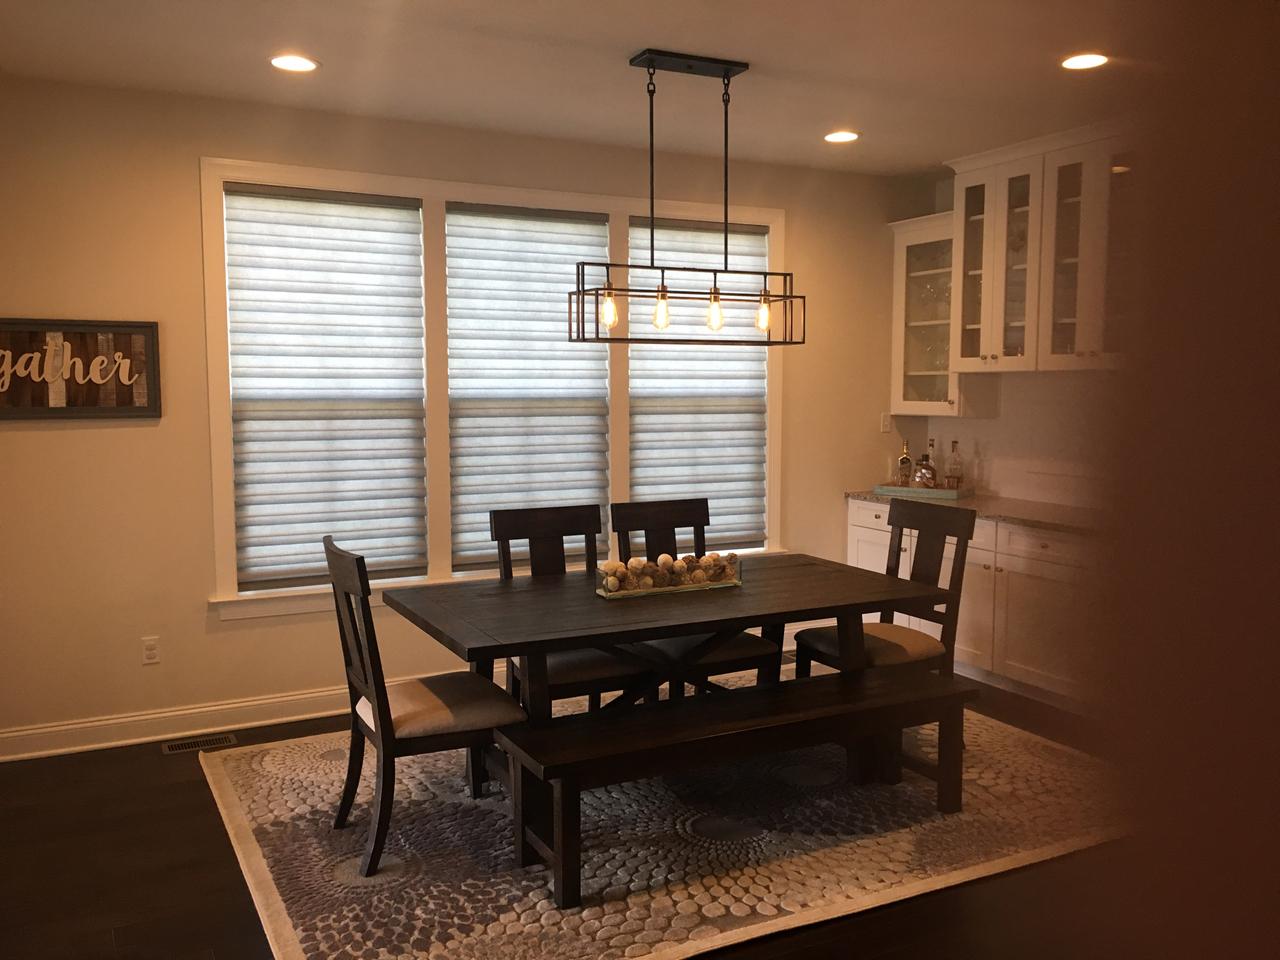 Modern Roman shades in a dining area